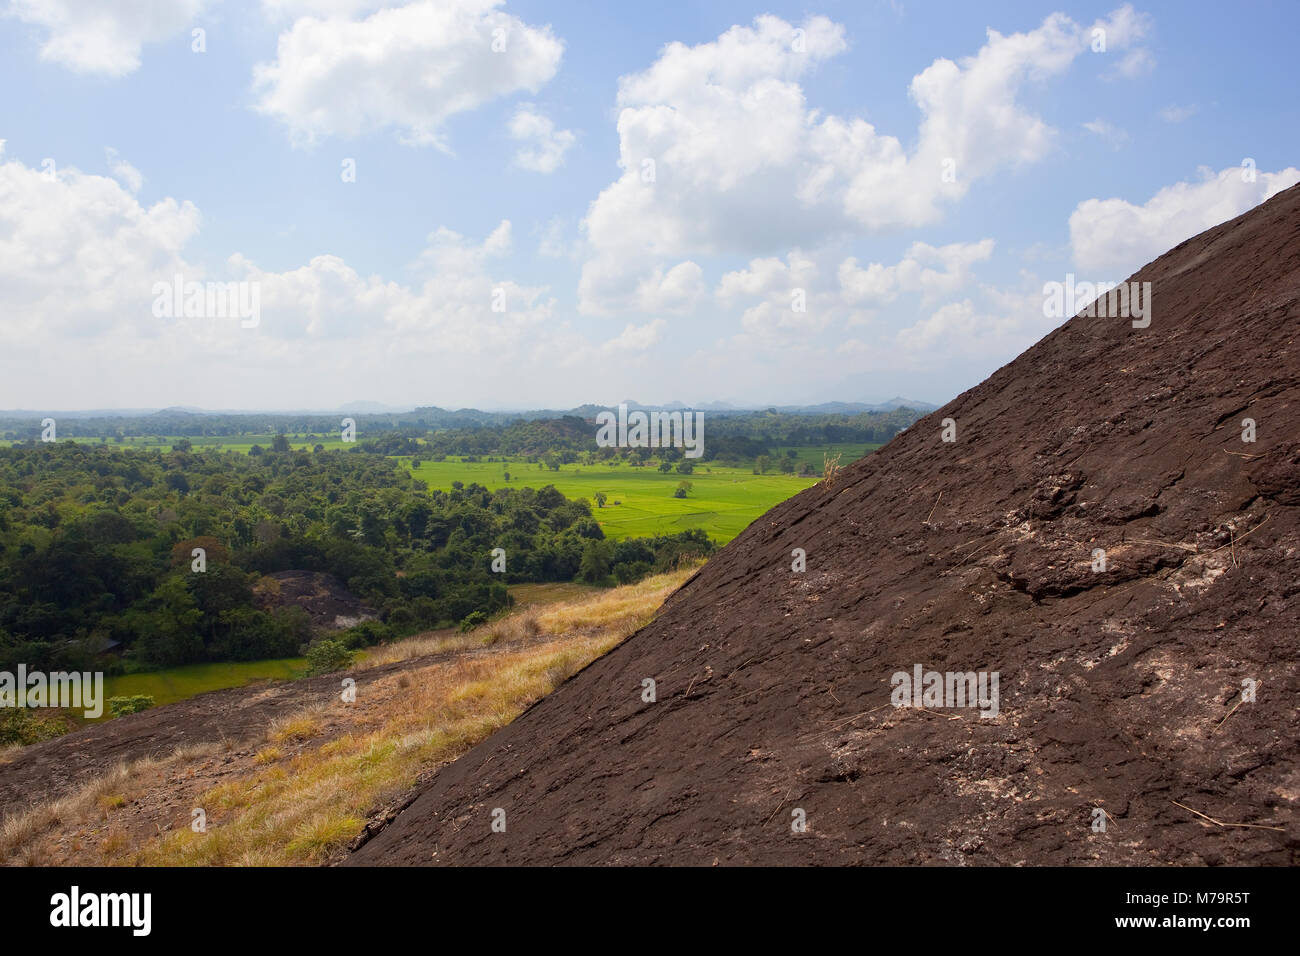 sri lankan volcanic rock formation in wasgamuwa national park with scenic landscape and hills under a blue sky with fluffy white clouds Stock Photo